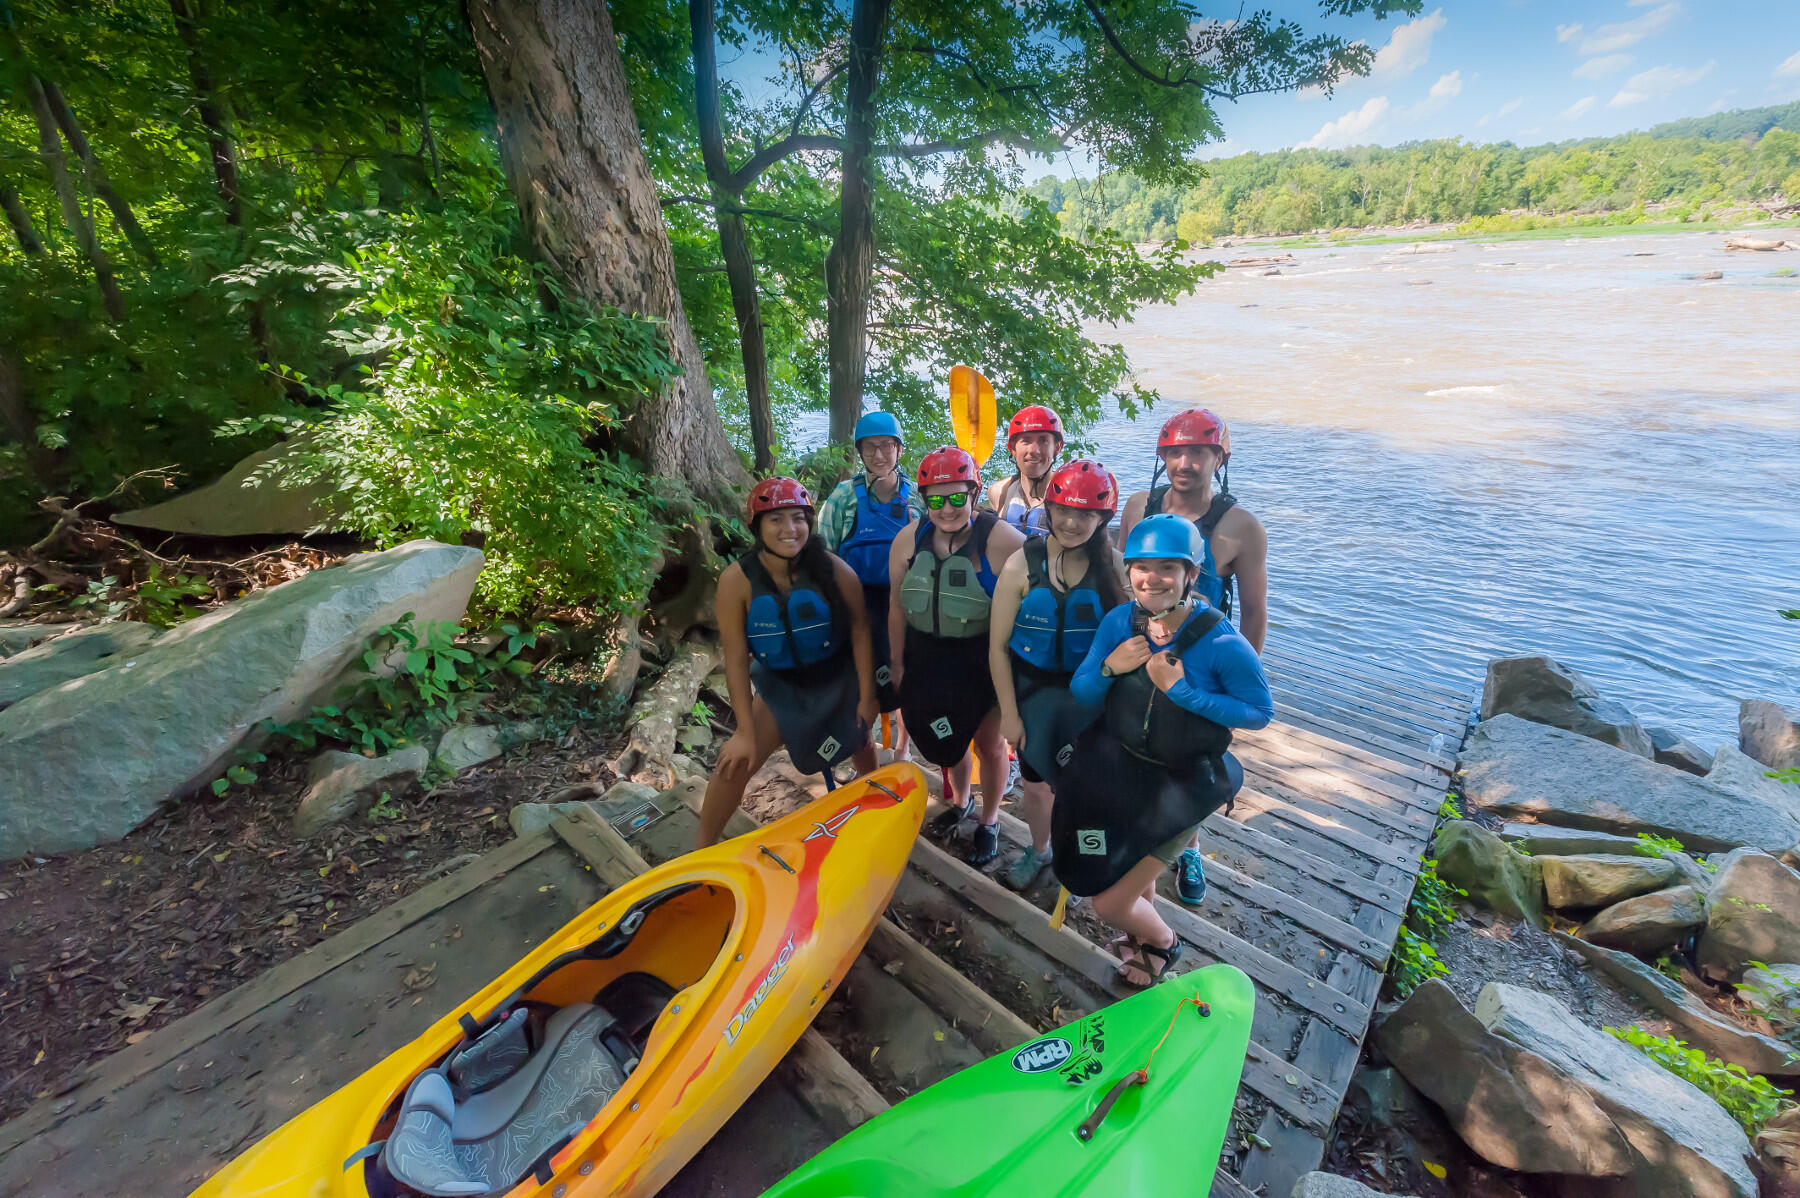 Students prepare to kayak on the upper rapids of the James River during a VCU Outdoor Adventure Program trip on an afternoon in August. (Photo by Tom Kojcsich, University Relations)